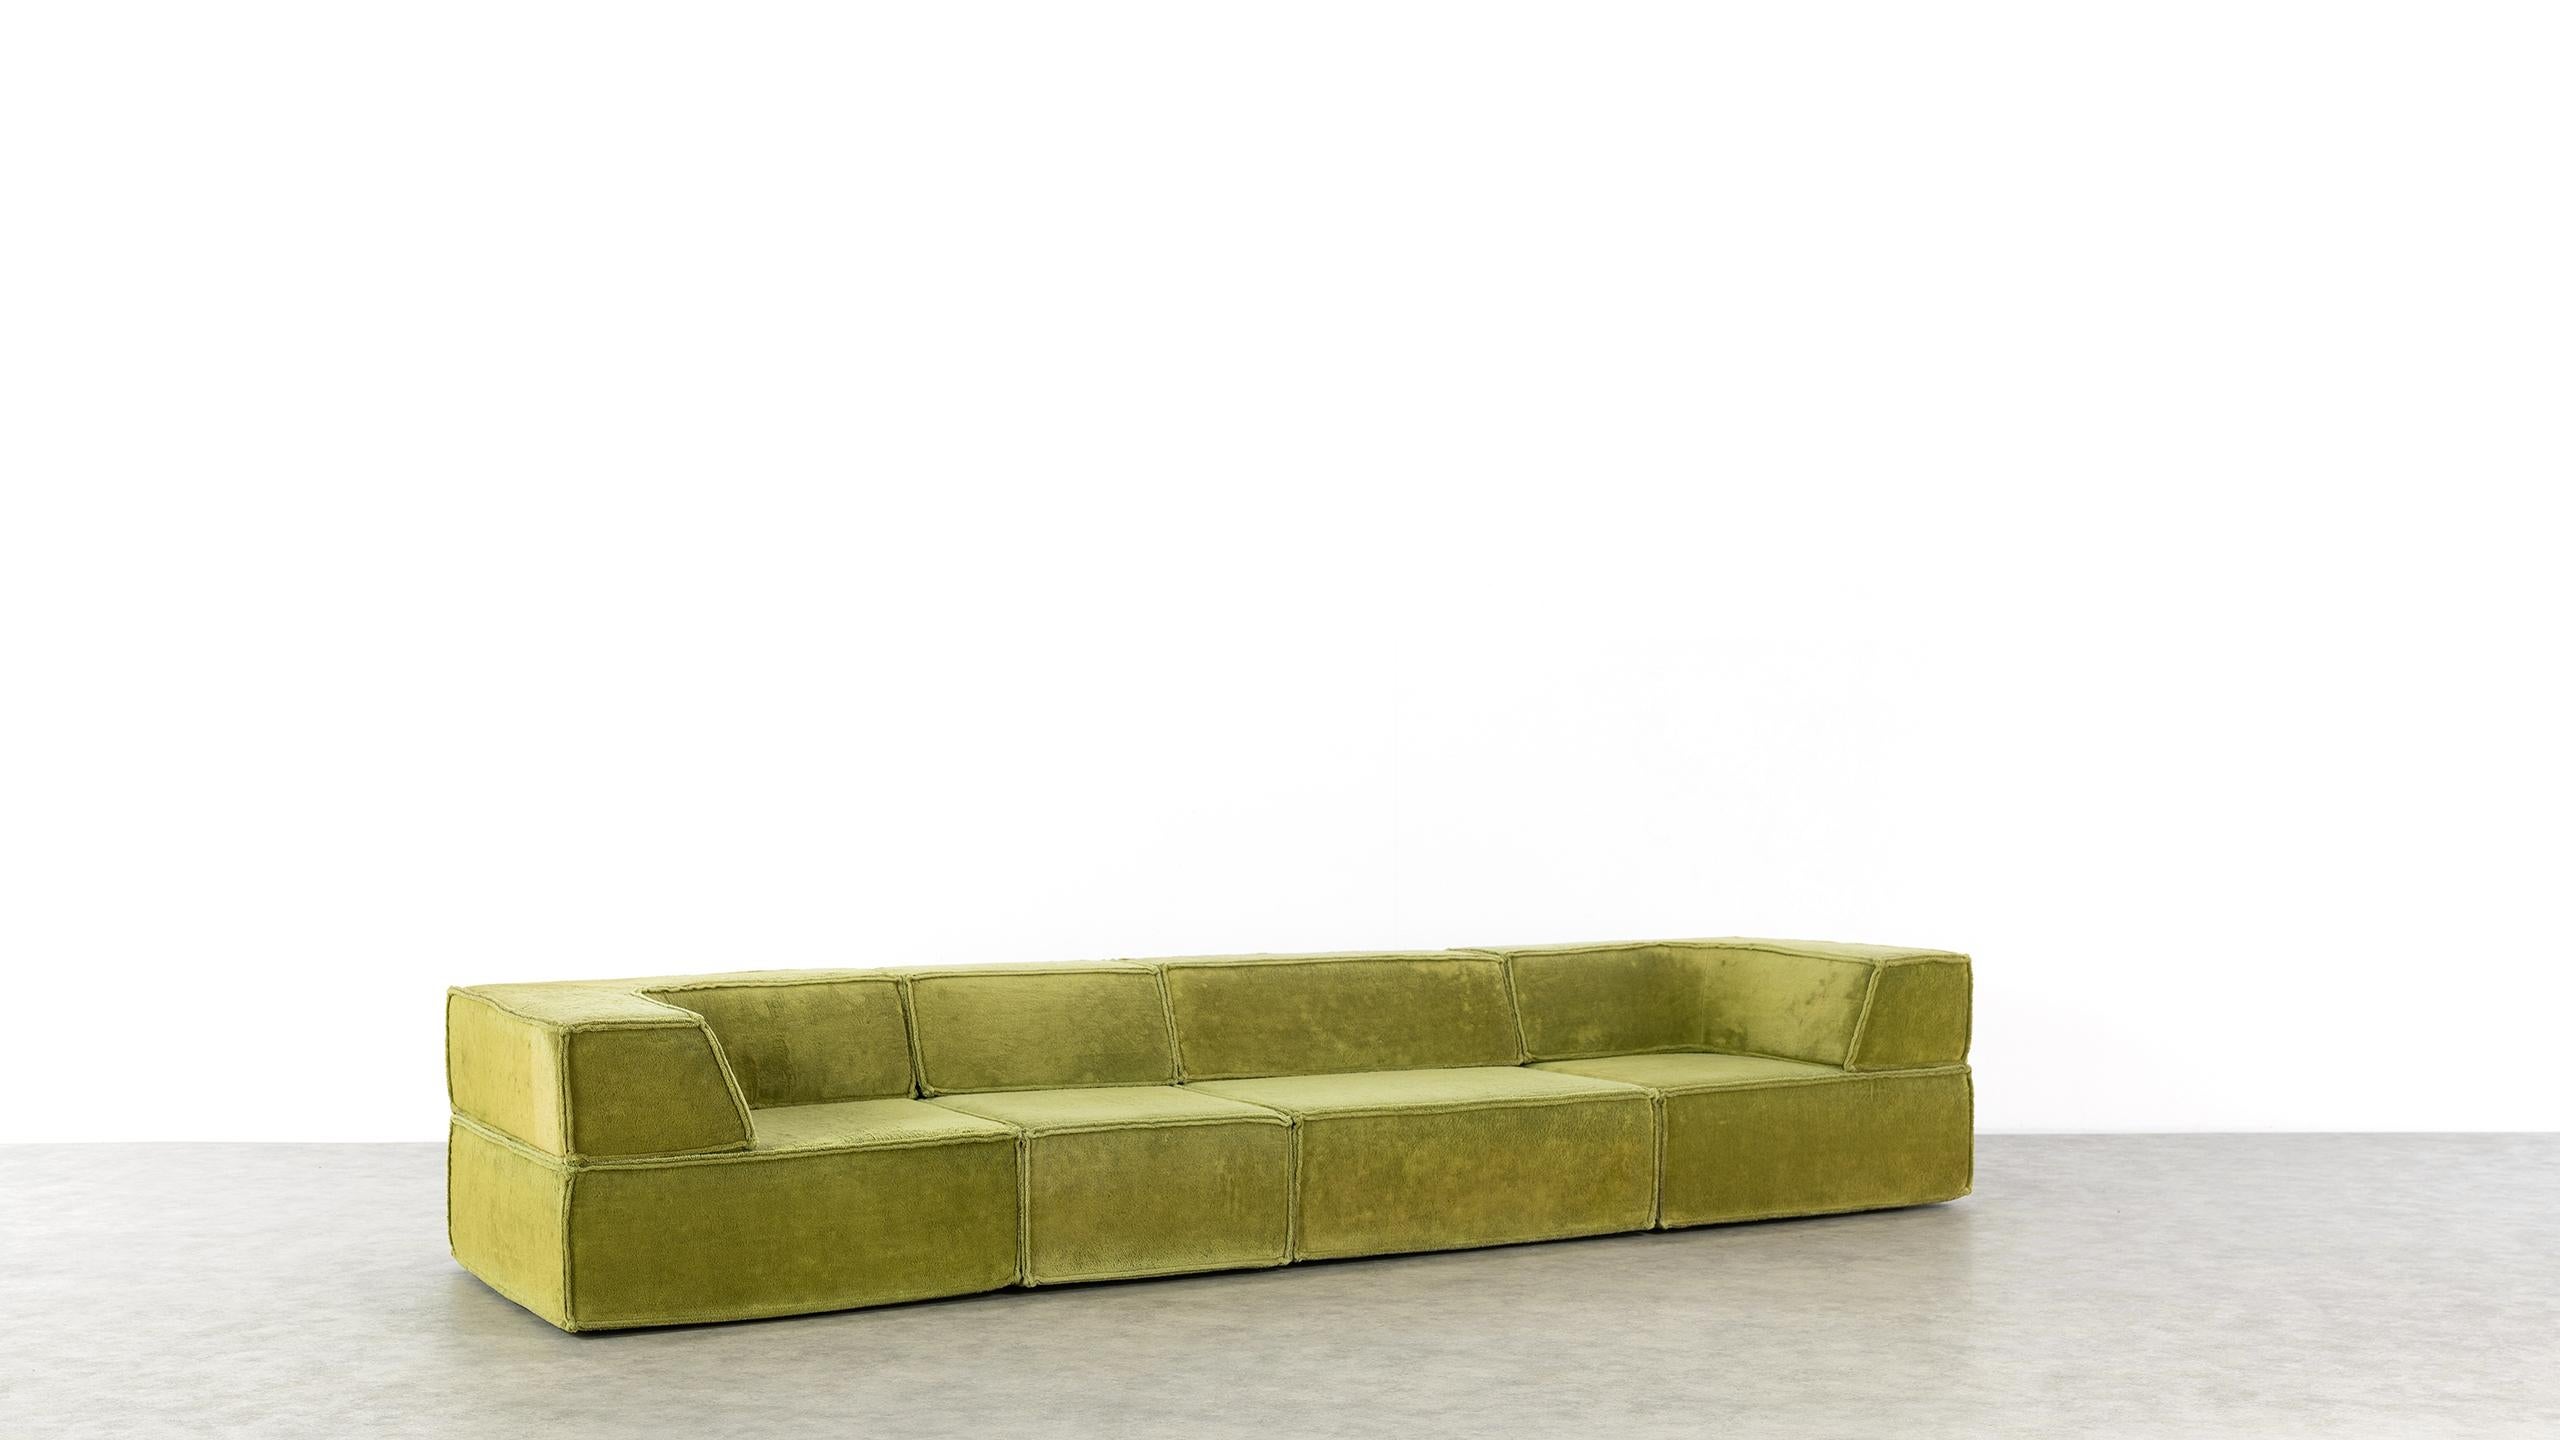 COR Trio Modular Sofa, Giant Landscape in Green, 1972 by Team Form Ag, Swiss 9